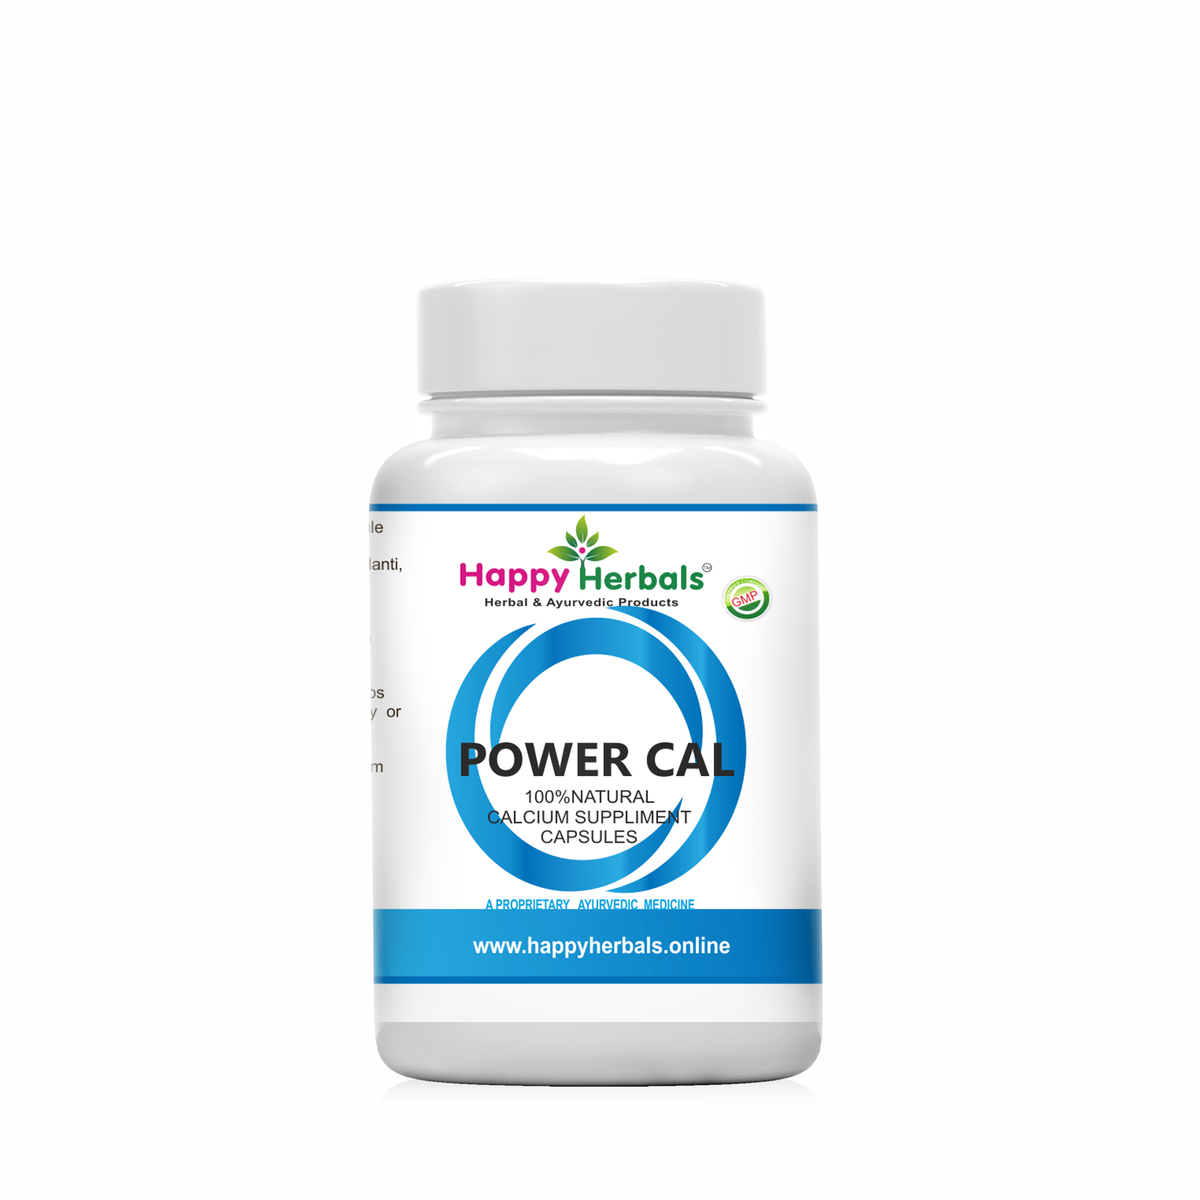 Experience vitality with HappyHerbals' Power Cal Capsules. Formulated with potent Ayurvedic ingredients, these capsules support bone health and overall well-being. Trust HappyHerbals for natural solutions to boost your vitality.